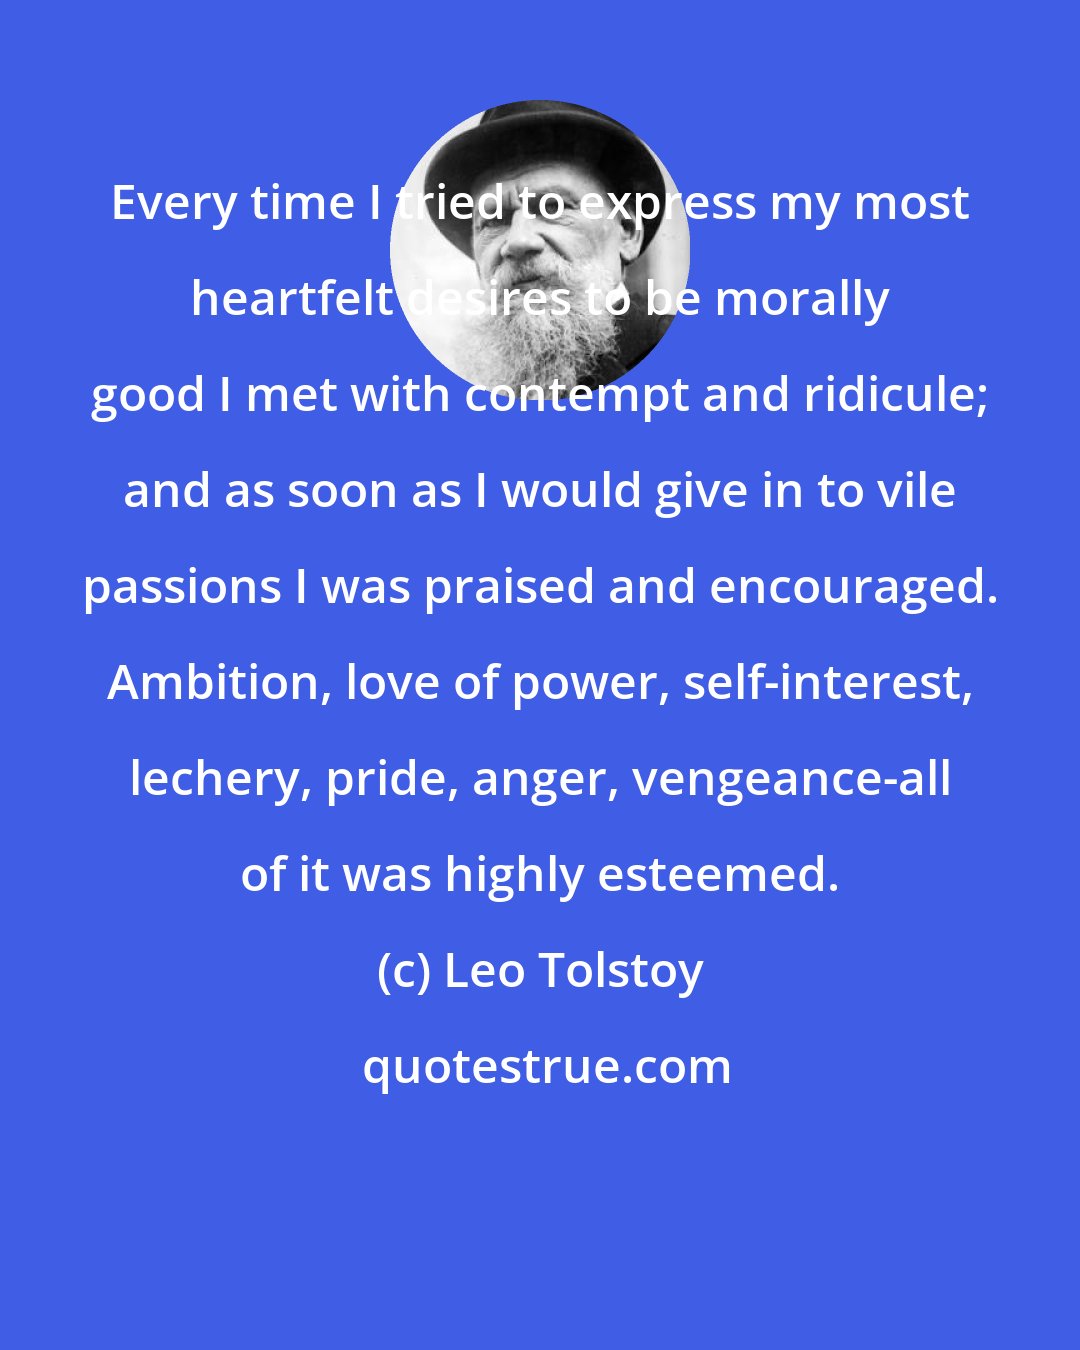 Leo Tolstoy: Every time I tried to express my most heartfelt desires to be morally good I met with contempt and ridicule; and as soon as I would give in to vile passions I was praised and encouraged. Ambition, love of power, self-interest, lechery, pride, anger, vengeance-all of it was highly esteemed.